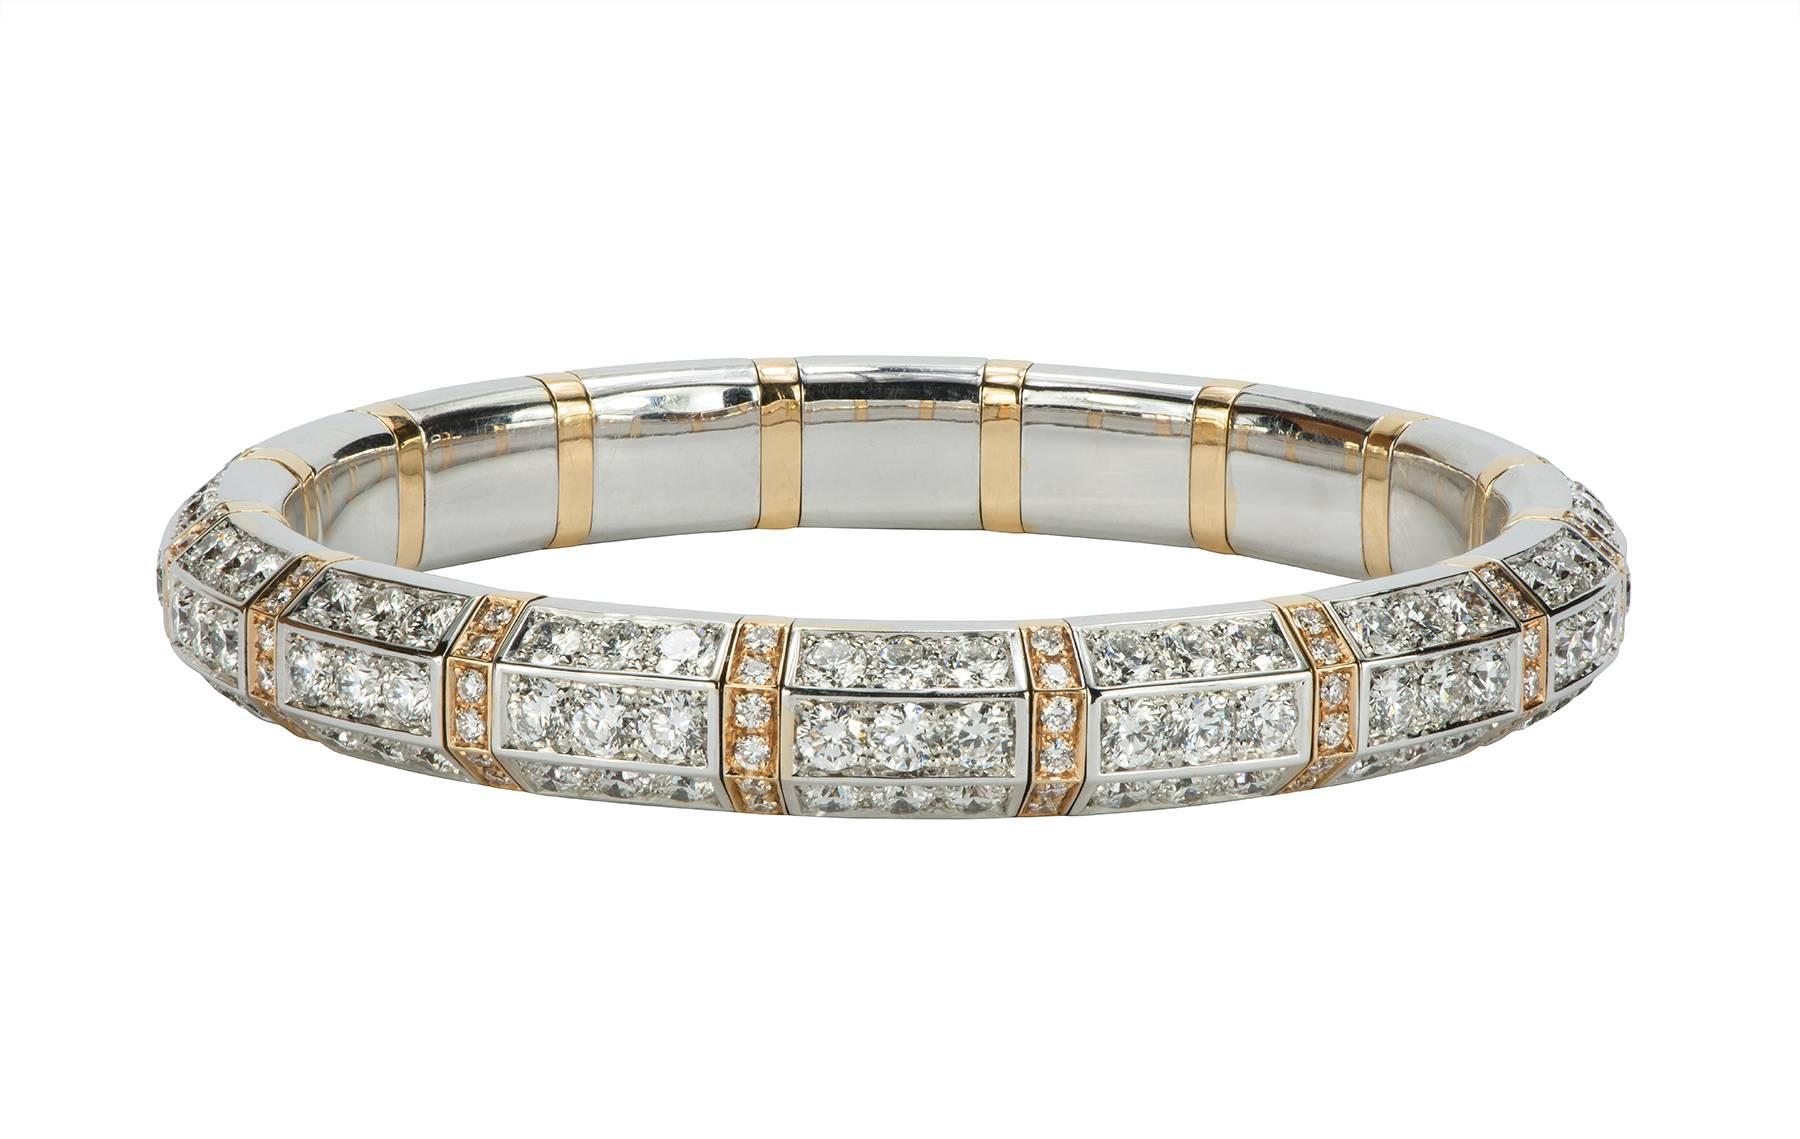 An absolutely stunning 13.30ct expandable tennis bracelet in 18kt white and pink gold by Picchiotti fine jewelers. The round brilliant diamonds are F-G color, VS clarity. The bracelet is made to stretch to slide over the hand and on to the wrist,